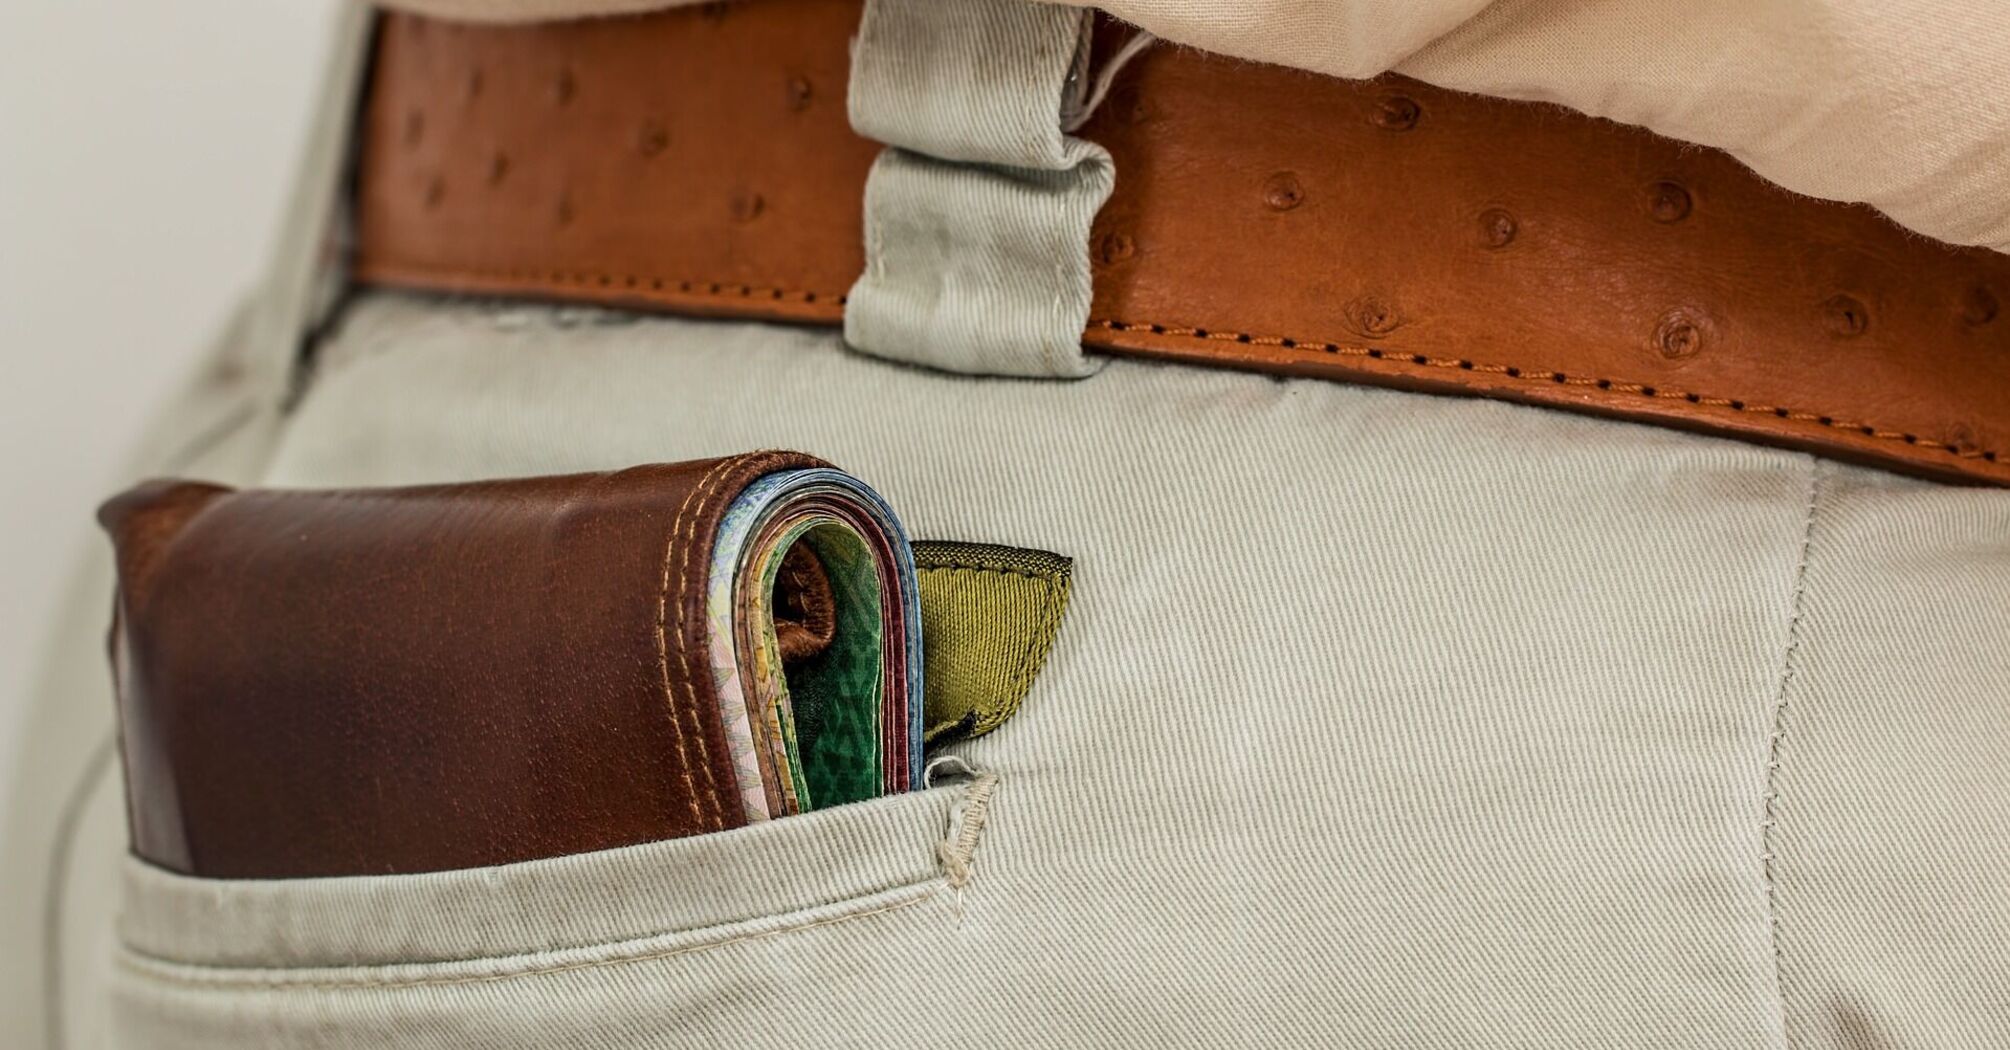 Wallet protruding from the back pocket of beige pants with a leather belt